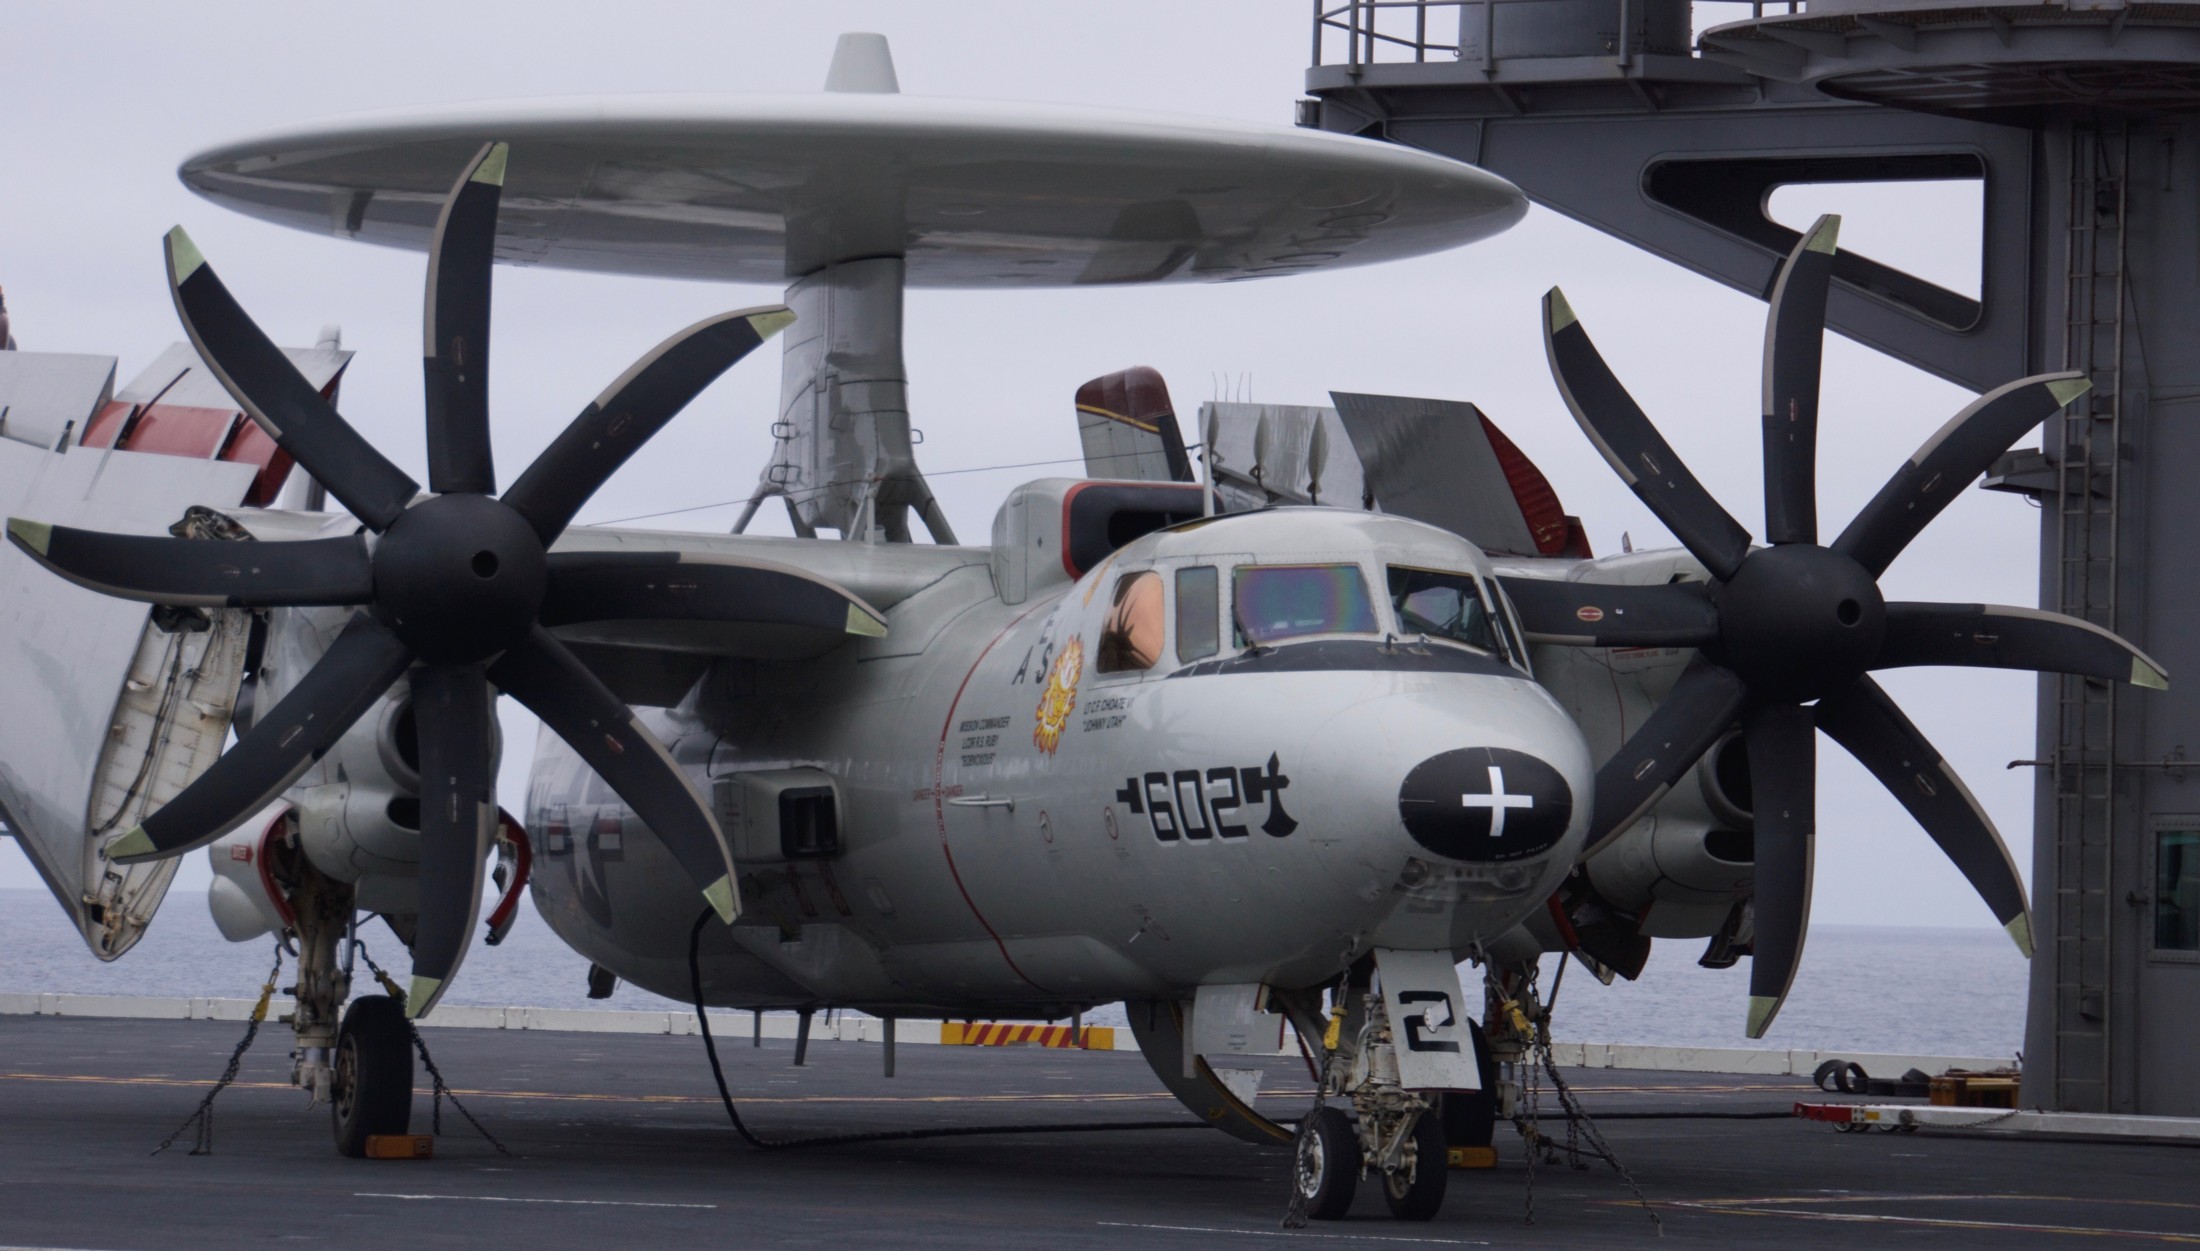 vaw-116 sun kings airborne command control squadron carrier early warning cvw-17 uss carl vinson cvn-70 53